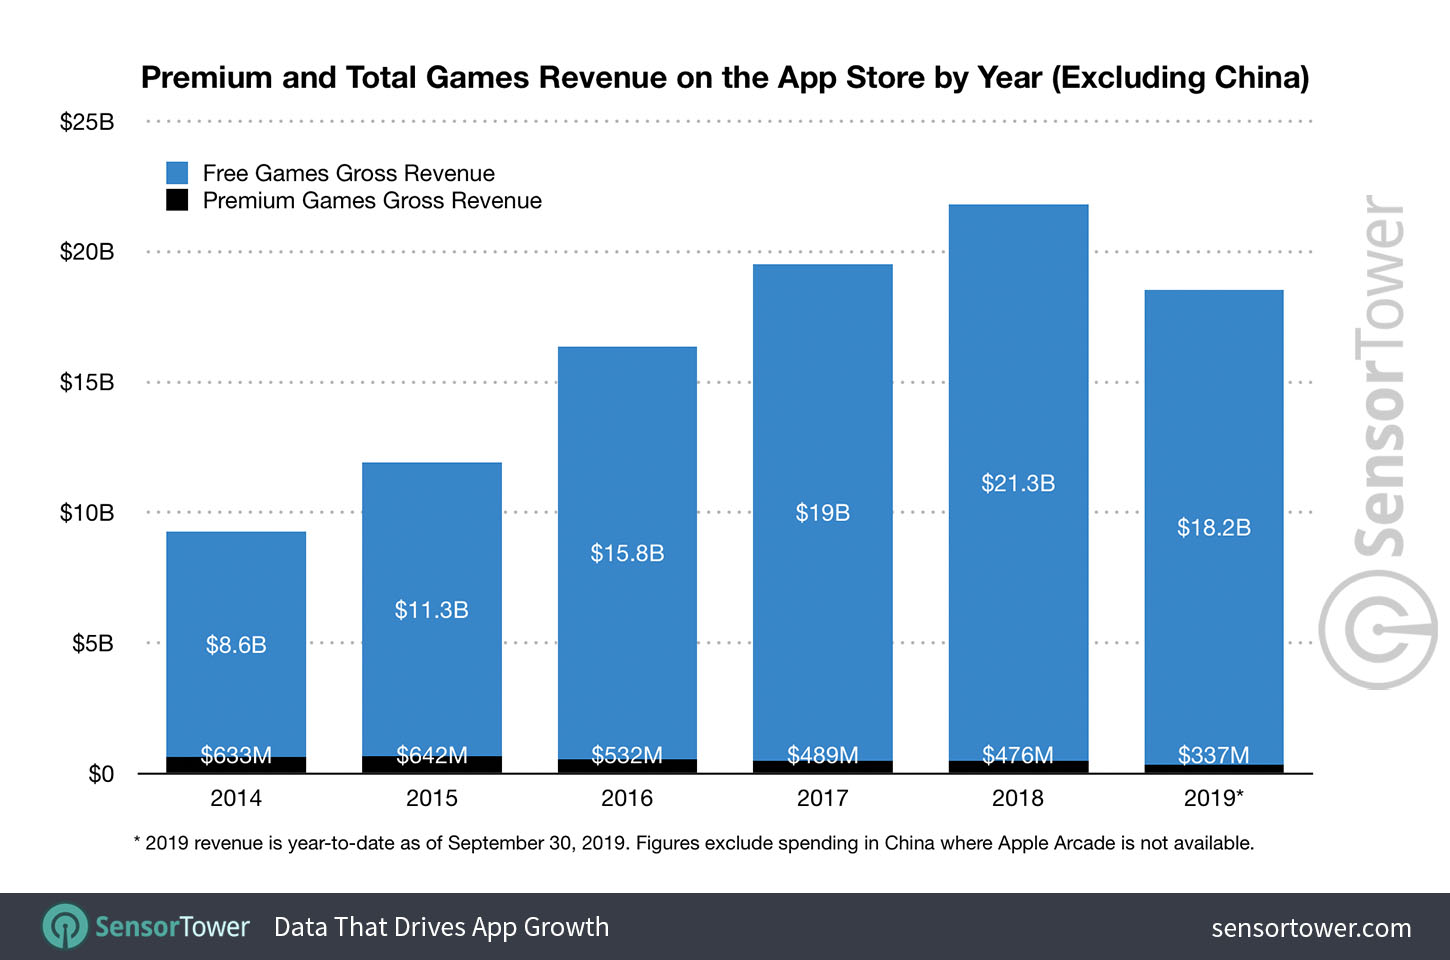 Premium game and all game revenue on the App Store between 2014 to 2019